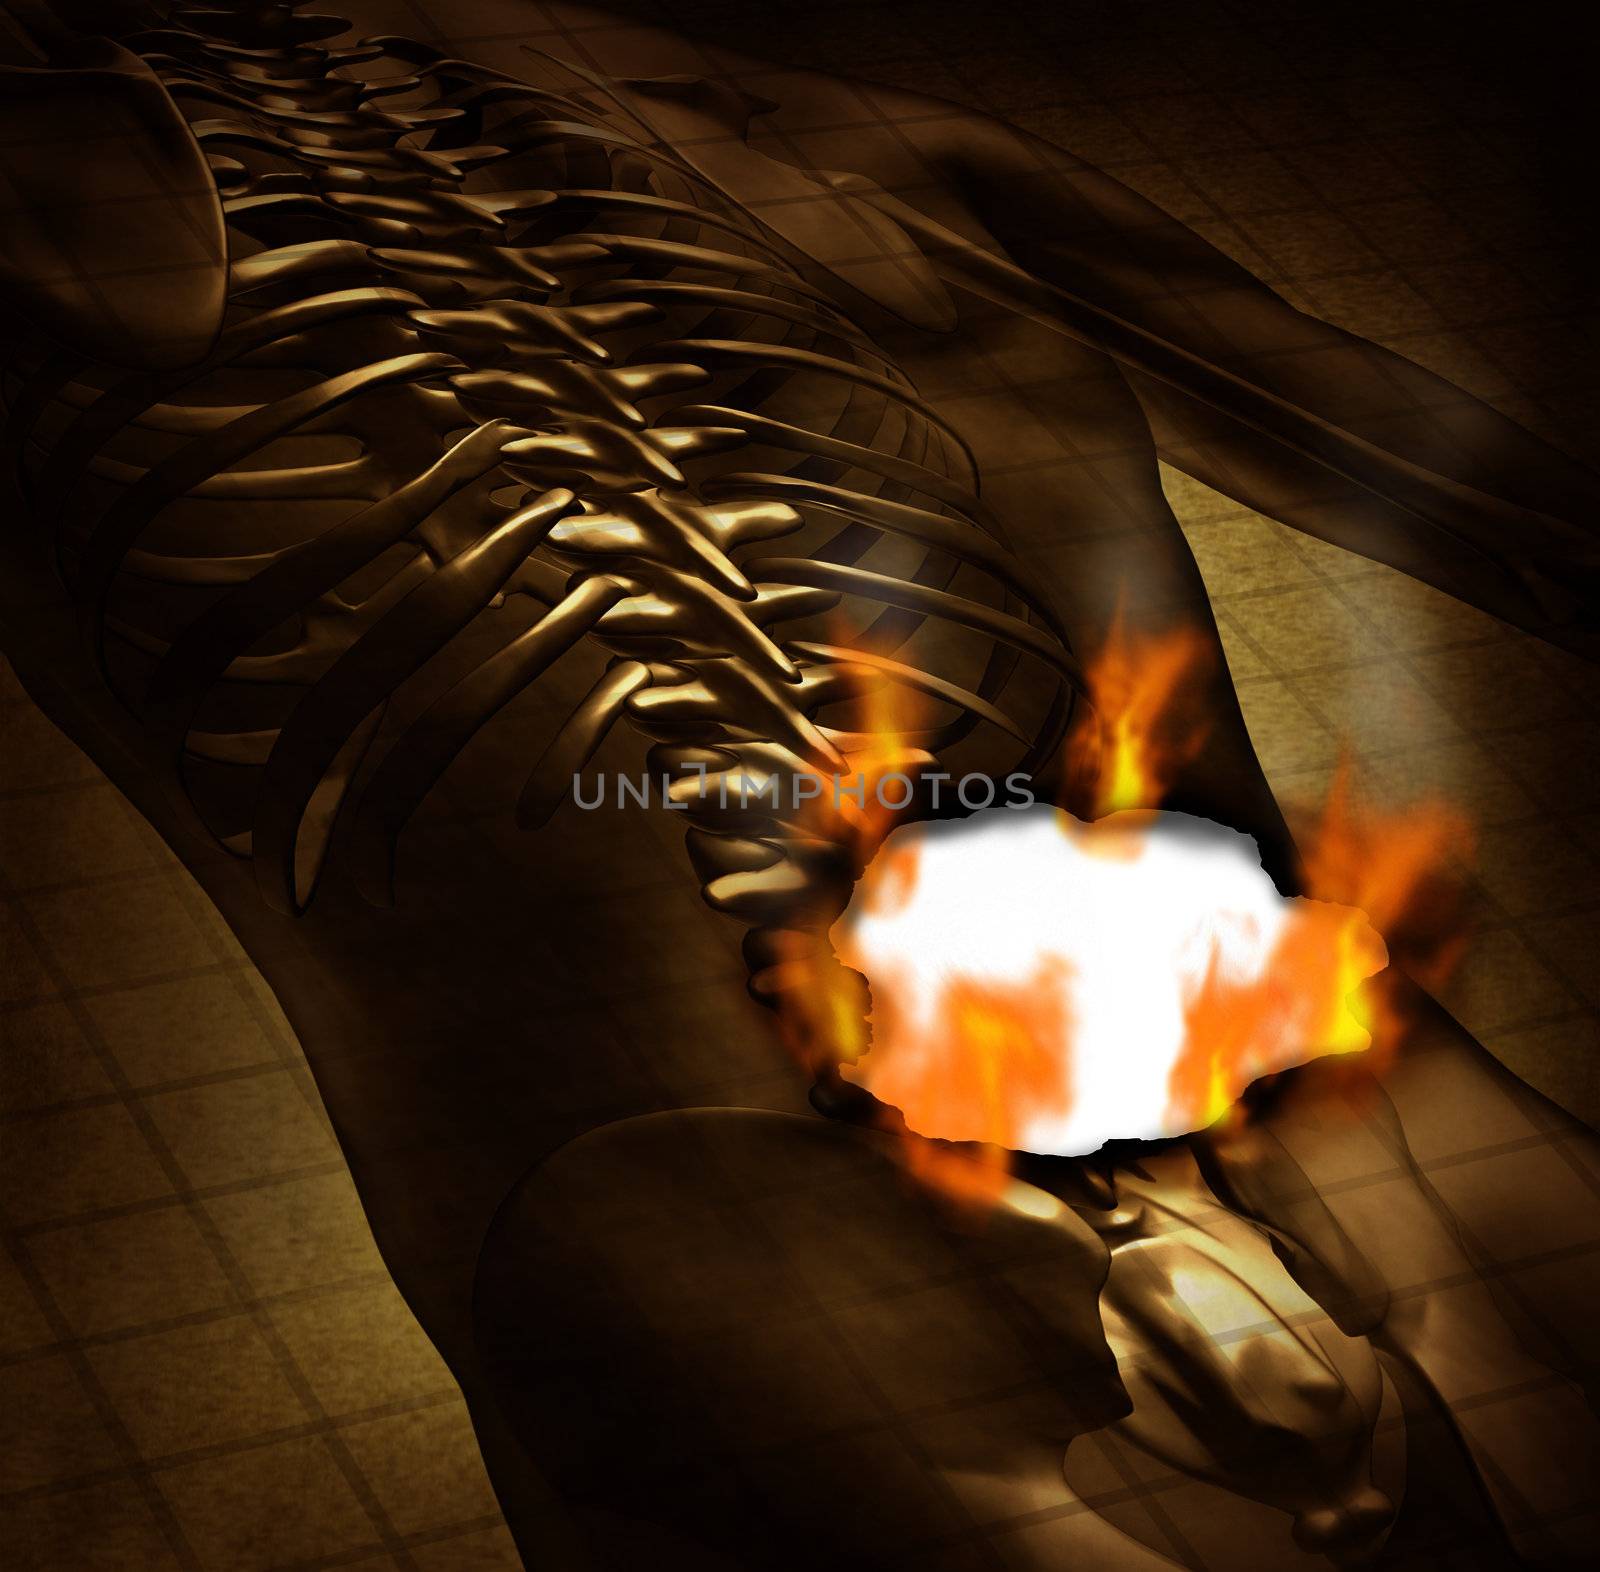 Human burning back pain and backache medical concept with a grunge old document of an upper torso body skeleton with the spine and vertebral column being burnt with fire flames and smoke as a health care symbol for spinal problems.